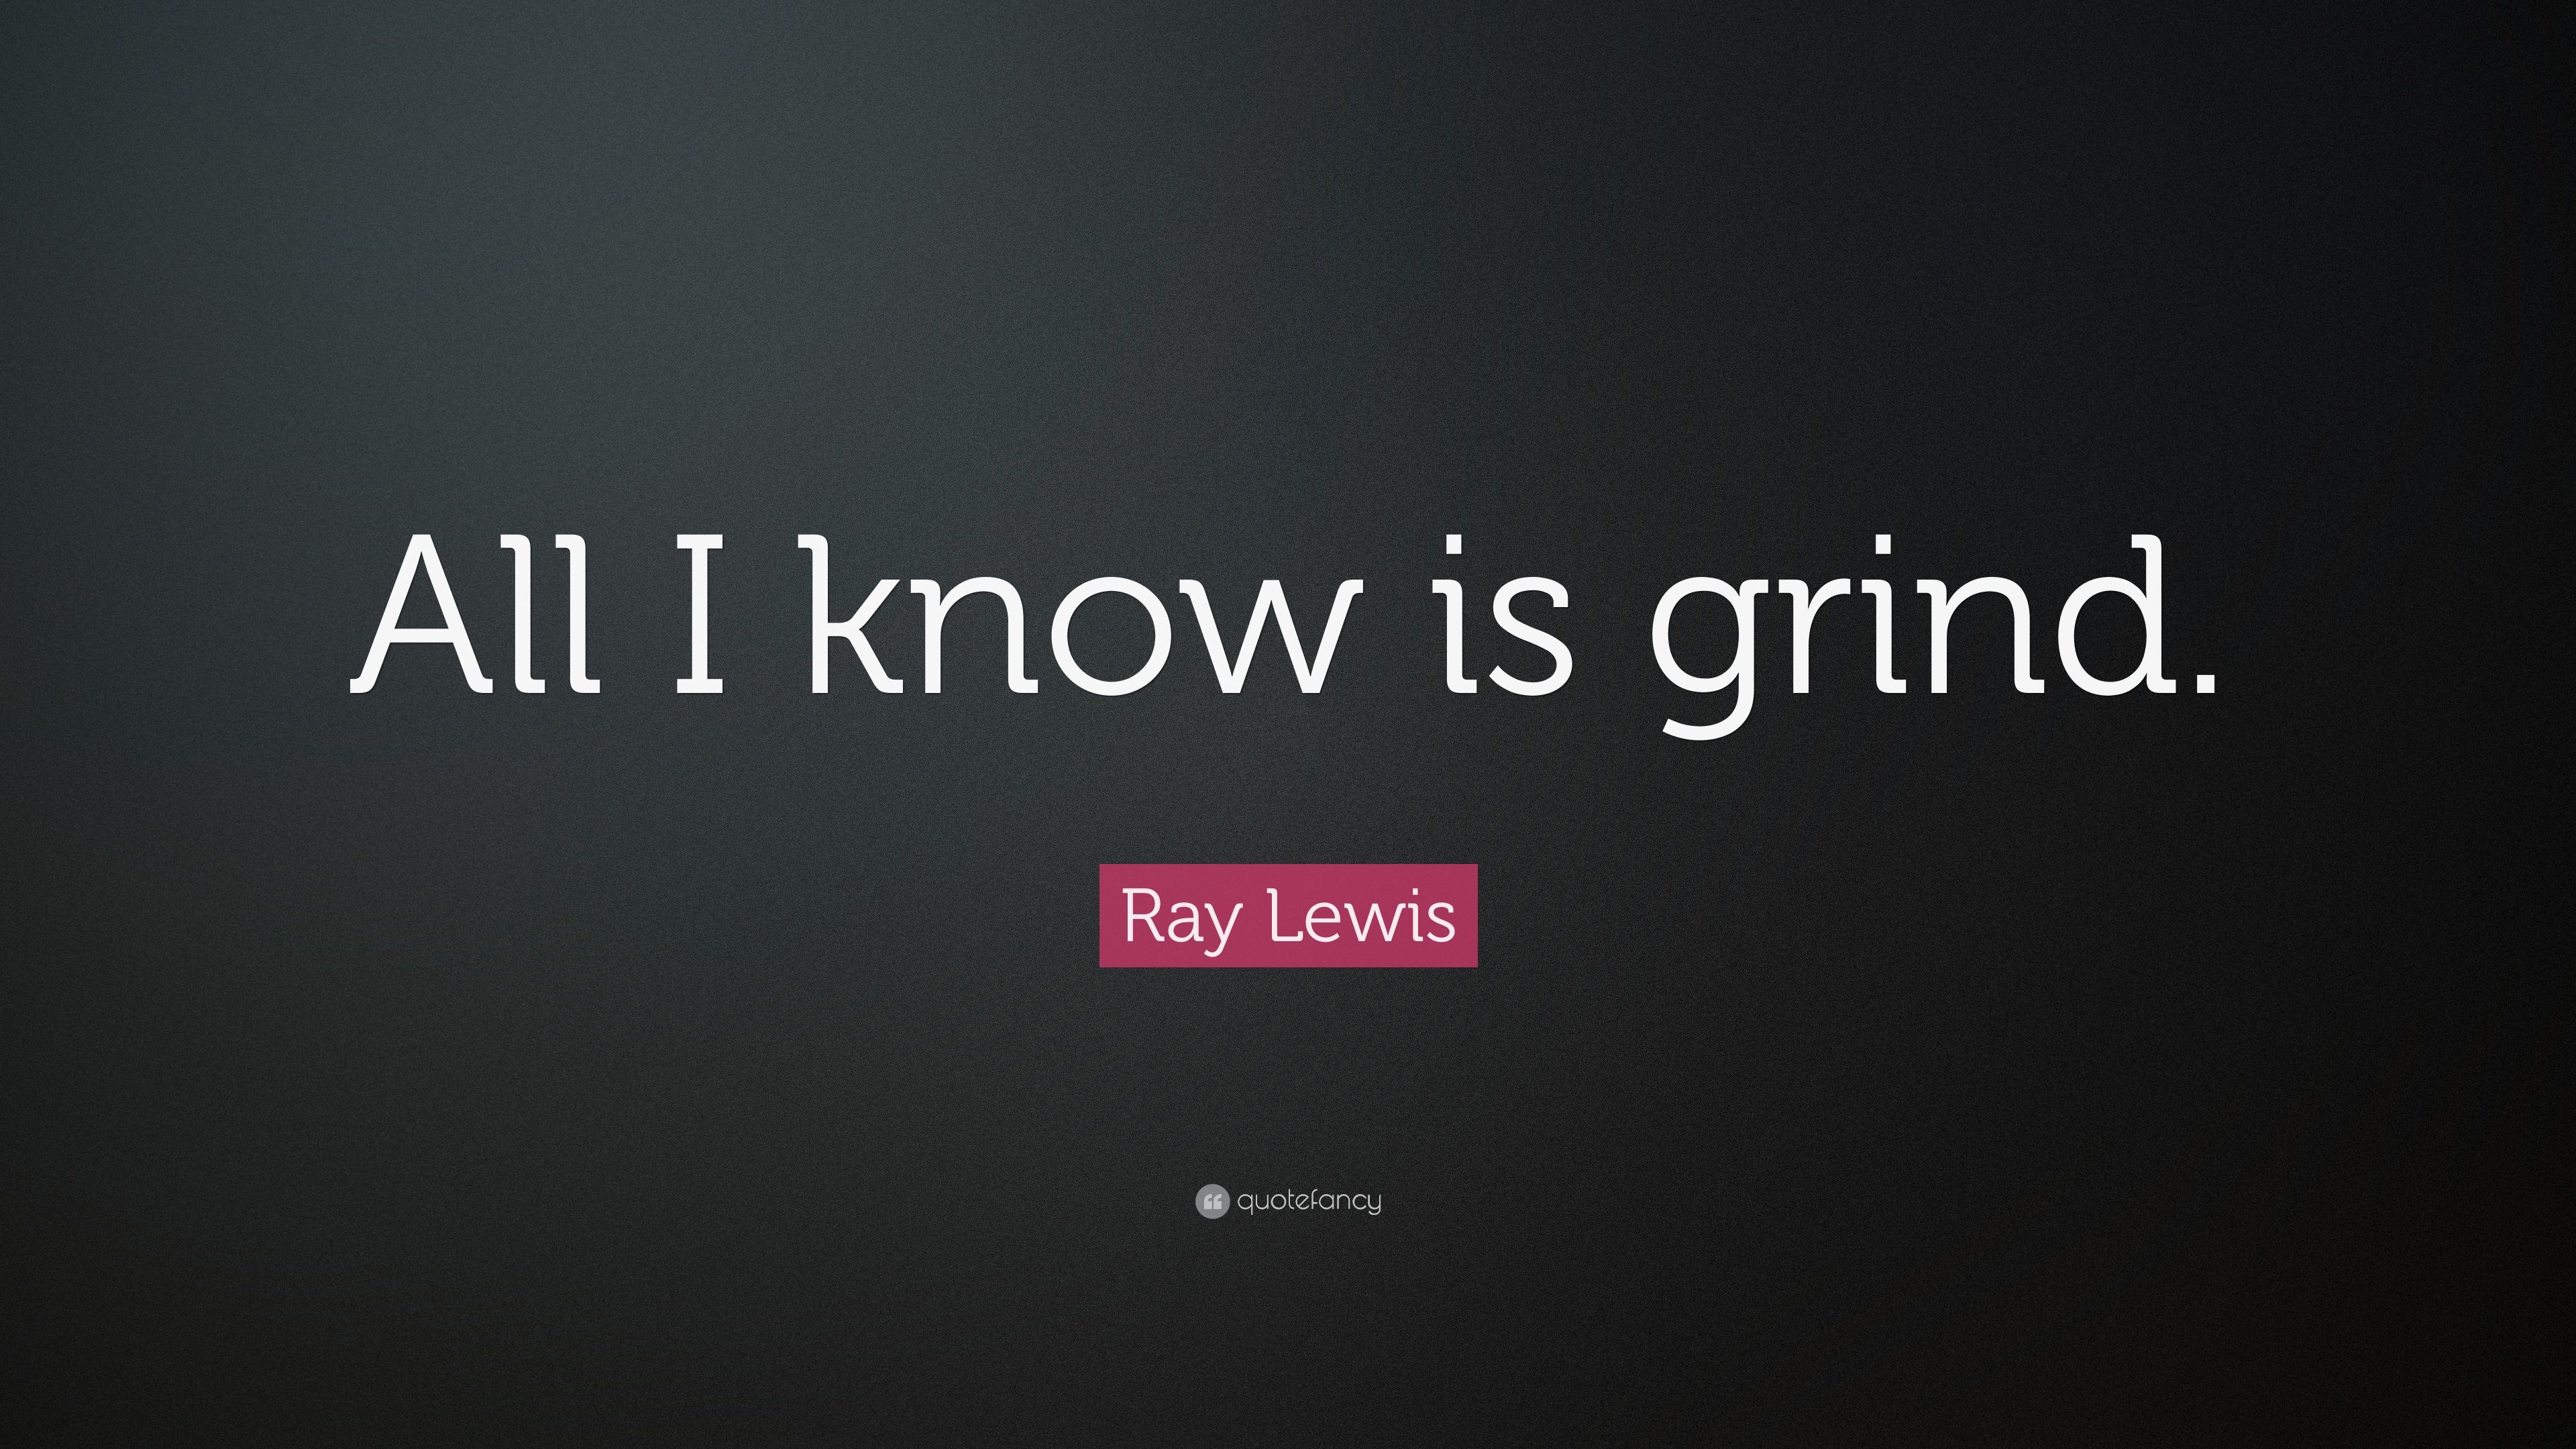 Ray Lewis Quote: “All I know is grind.” (14 wallpaper)